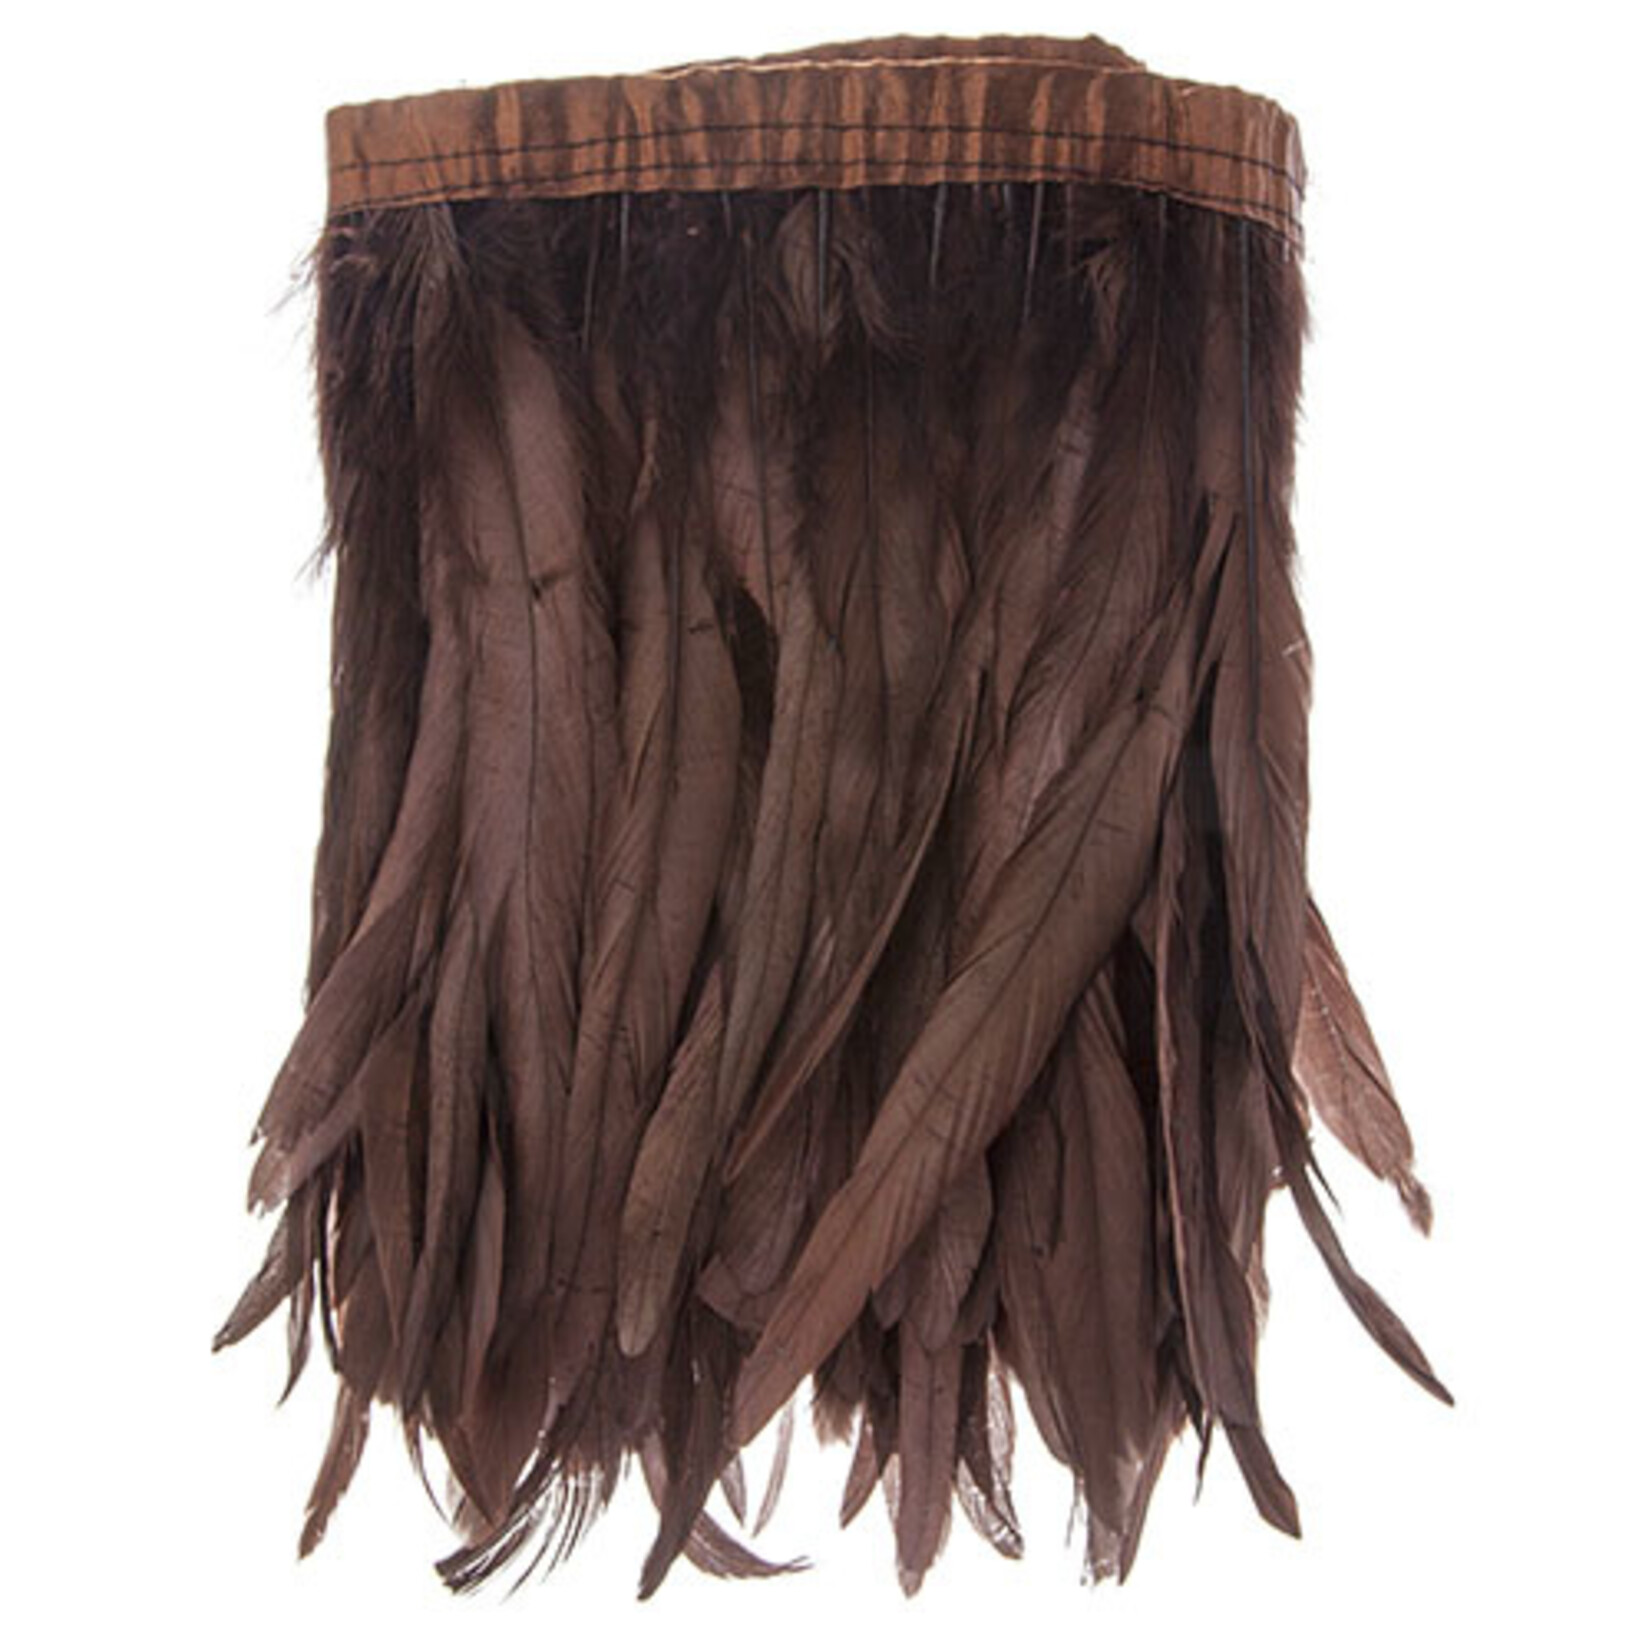 Coque Feathers Value 12-14 Inches Brown